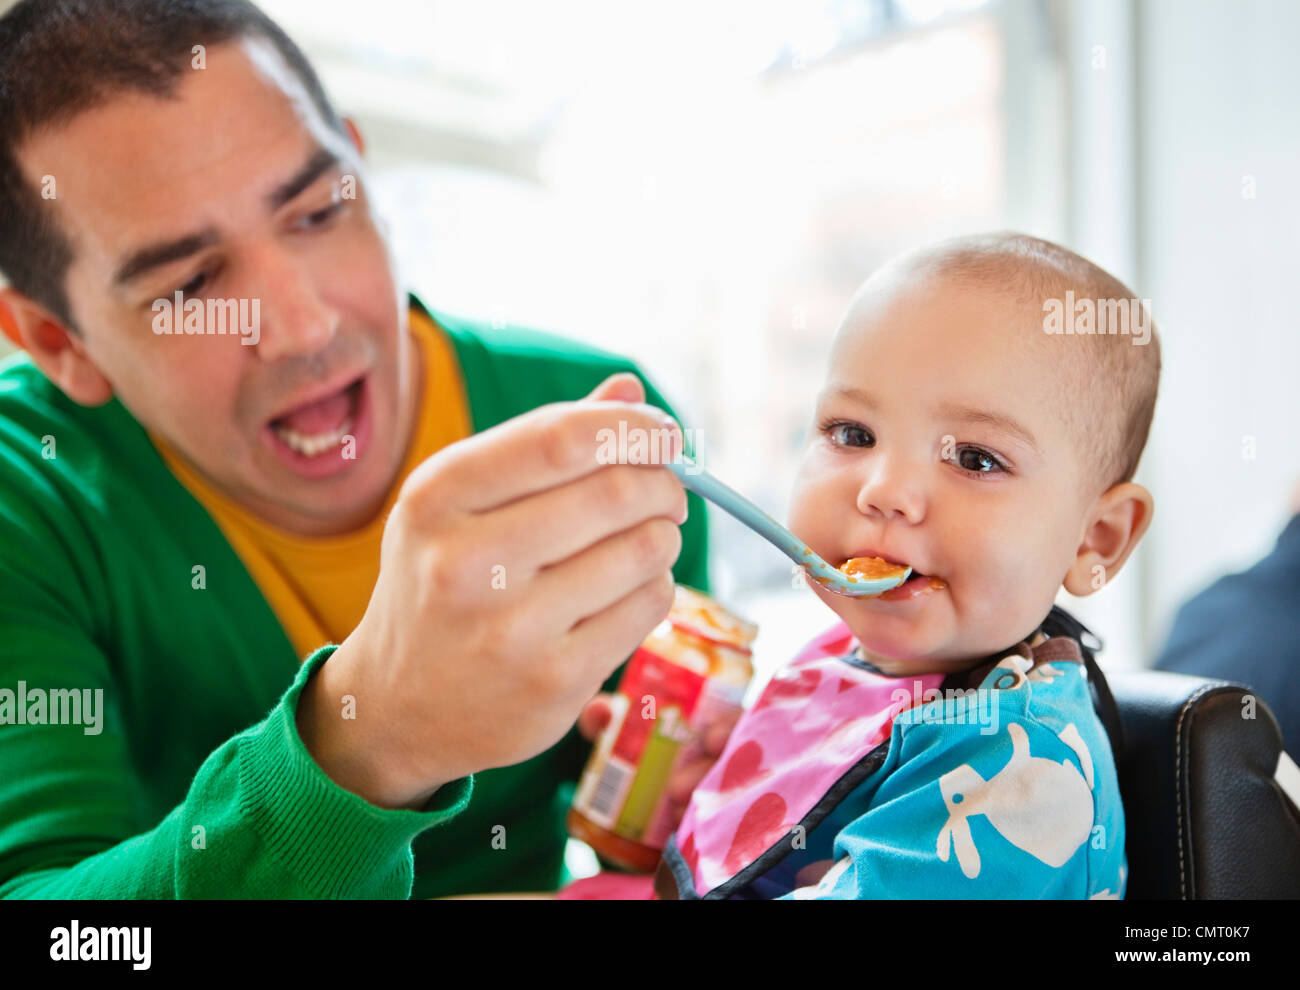 Father feeding baby with plastic spoon Stock Photo